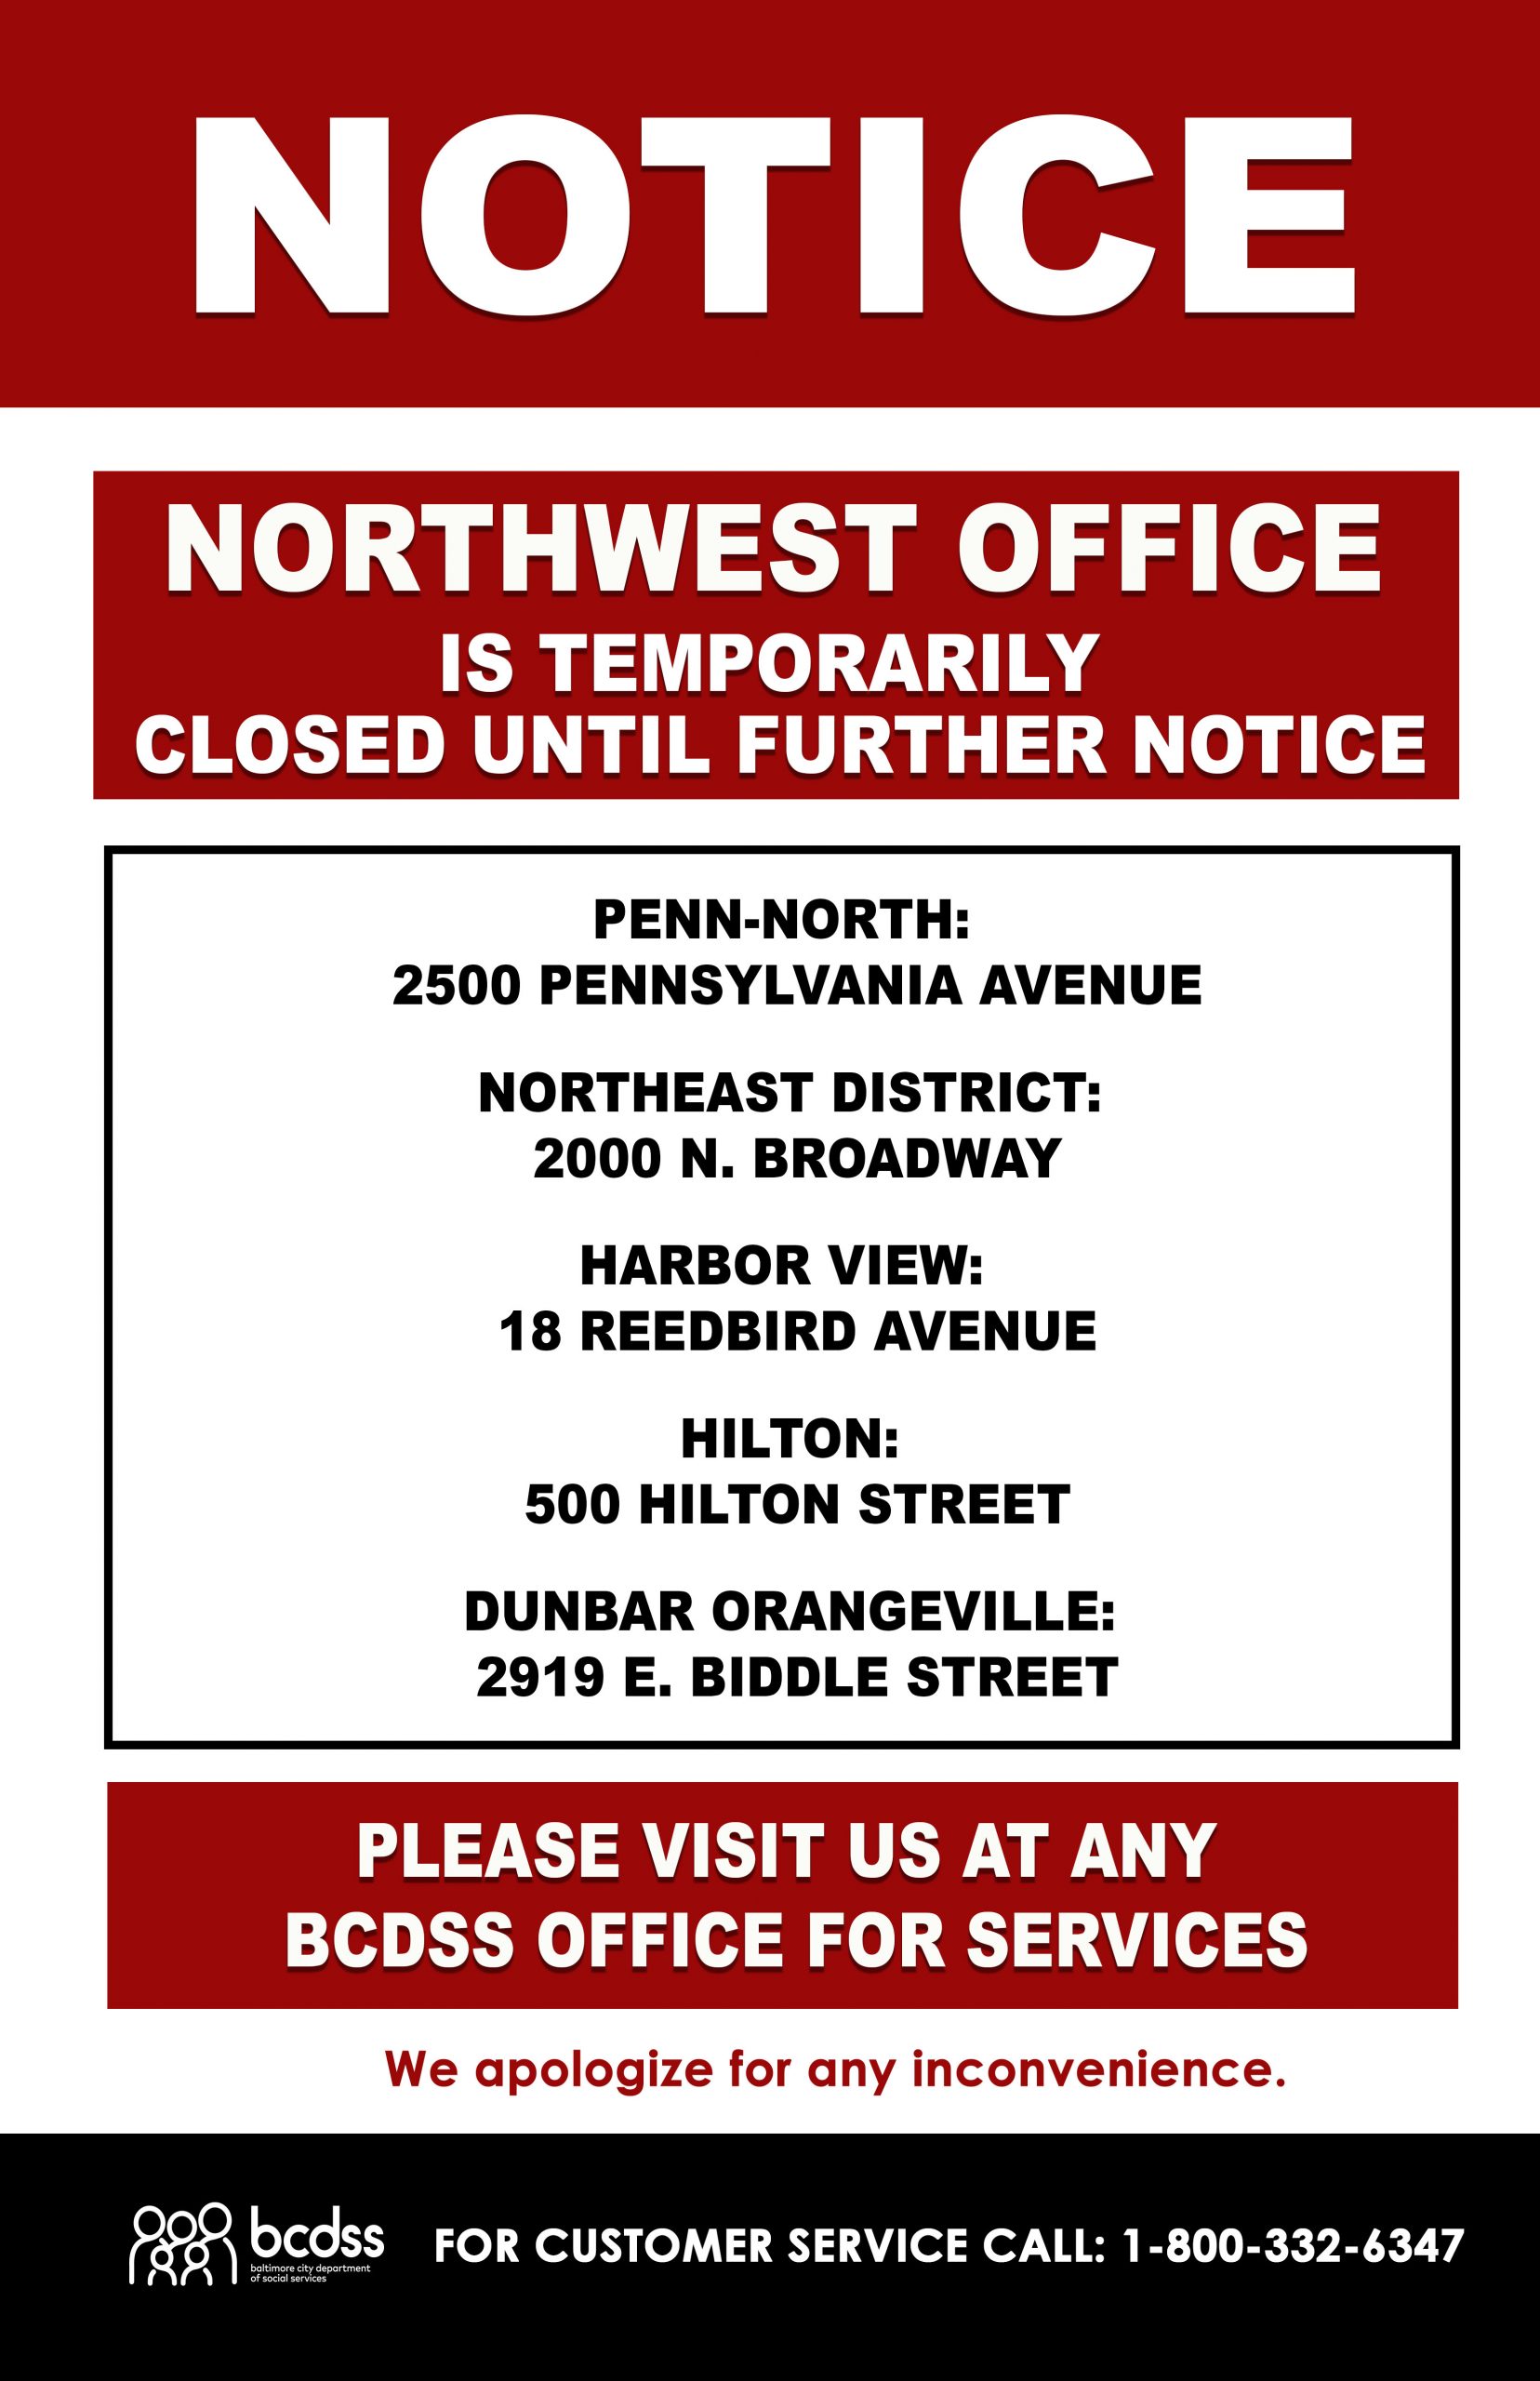 Northwest Office is Temporarily Relocated